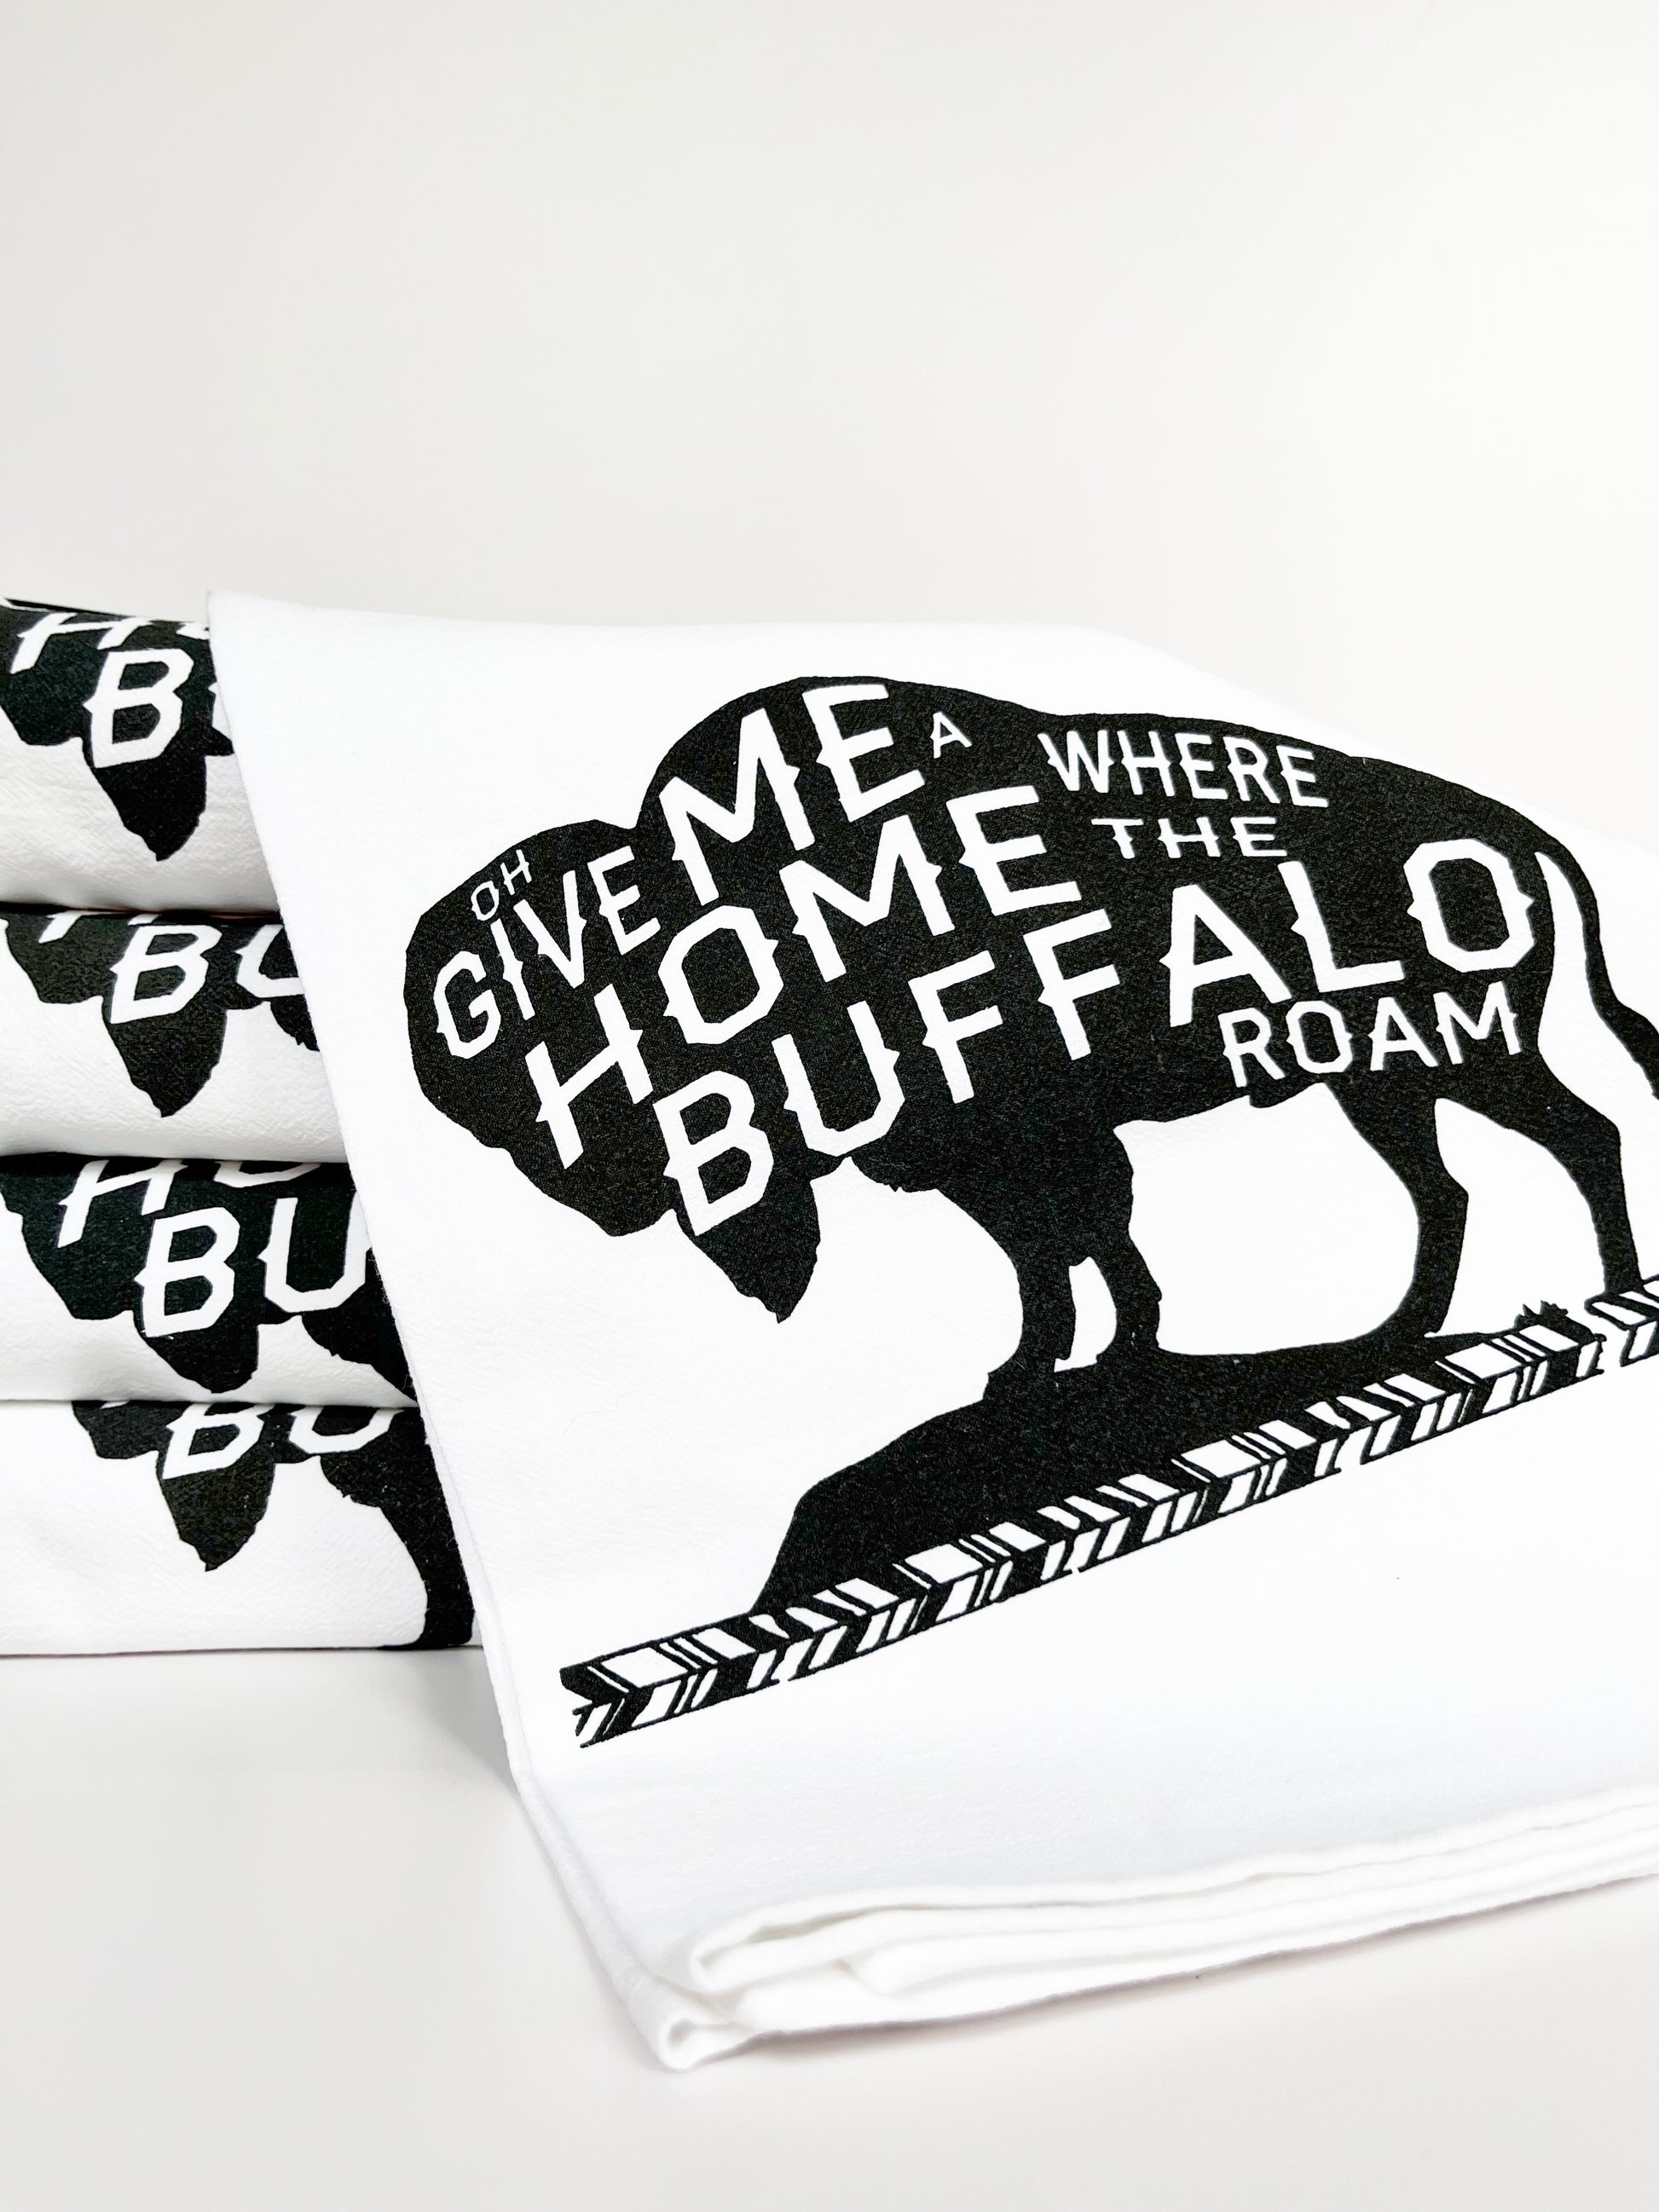 oh give me a home where the buffalo roam lyrics on cotton dish towel screen printed large bison souvenir yellowstone badlands grand canyon western national parks wyoming montana colorado screen printed tea towel with cute animals coin laundry montana